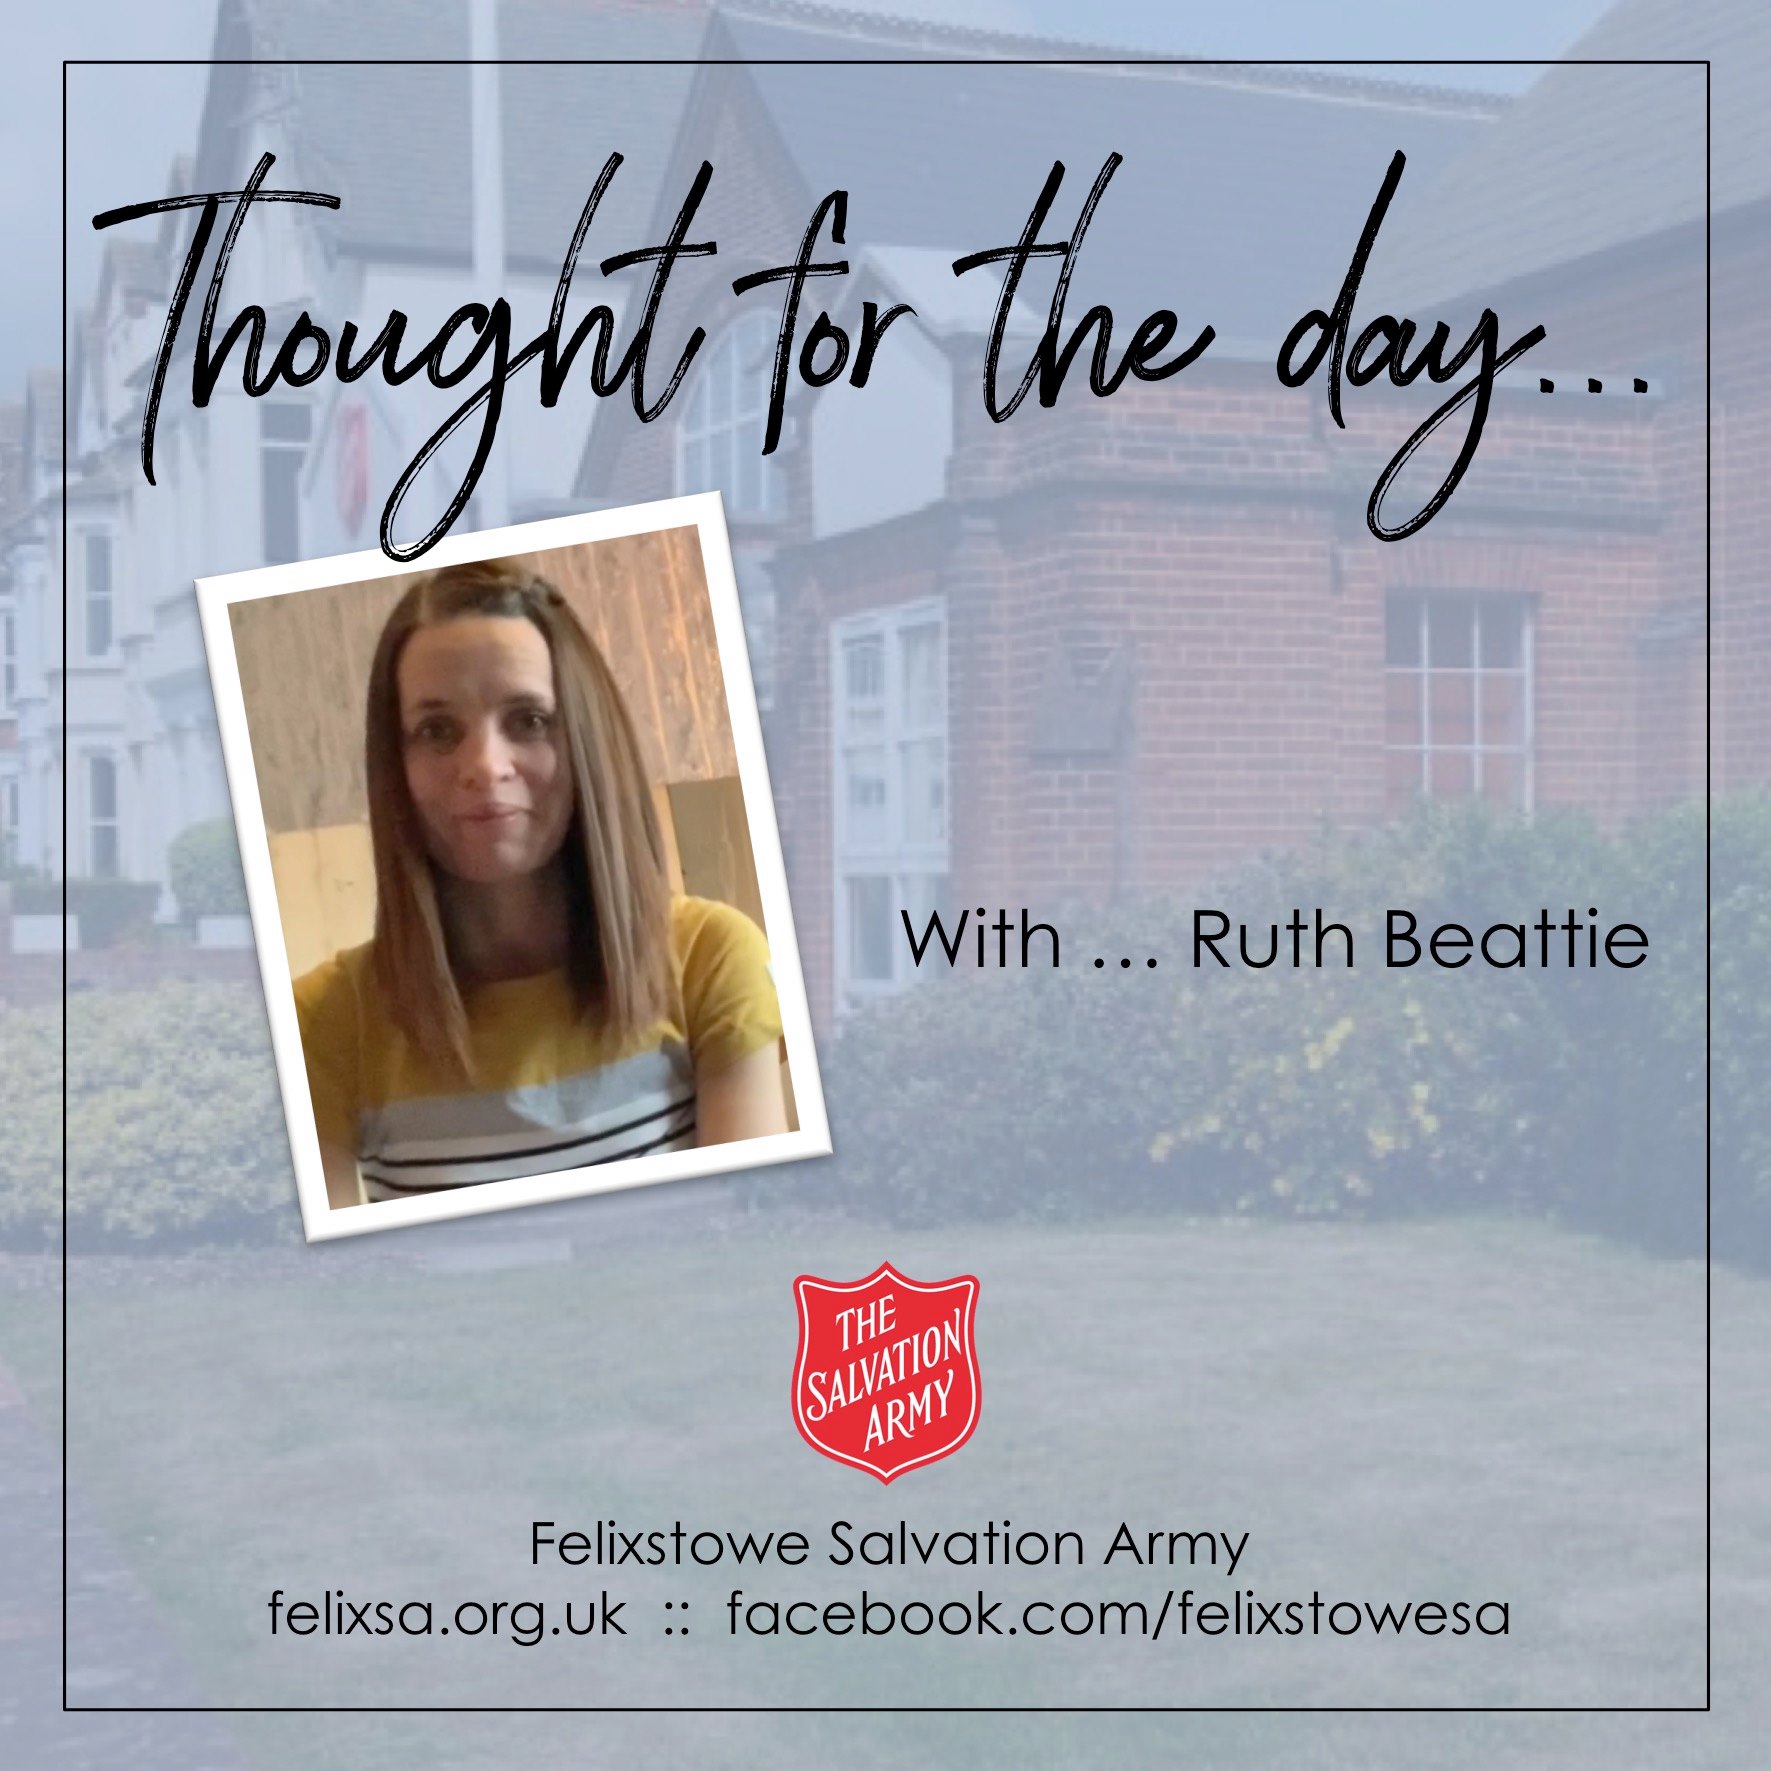 Thought for the Day with Ruth Beattie (Divisional Youth Specialist)